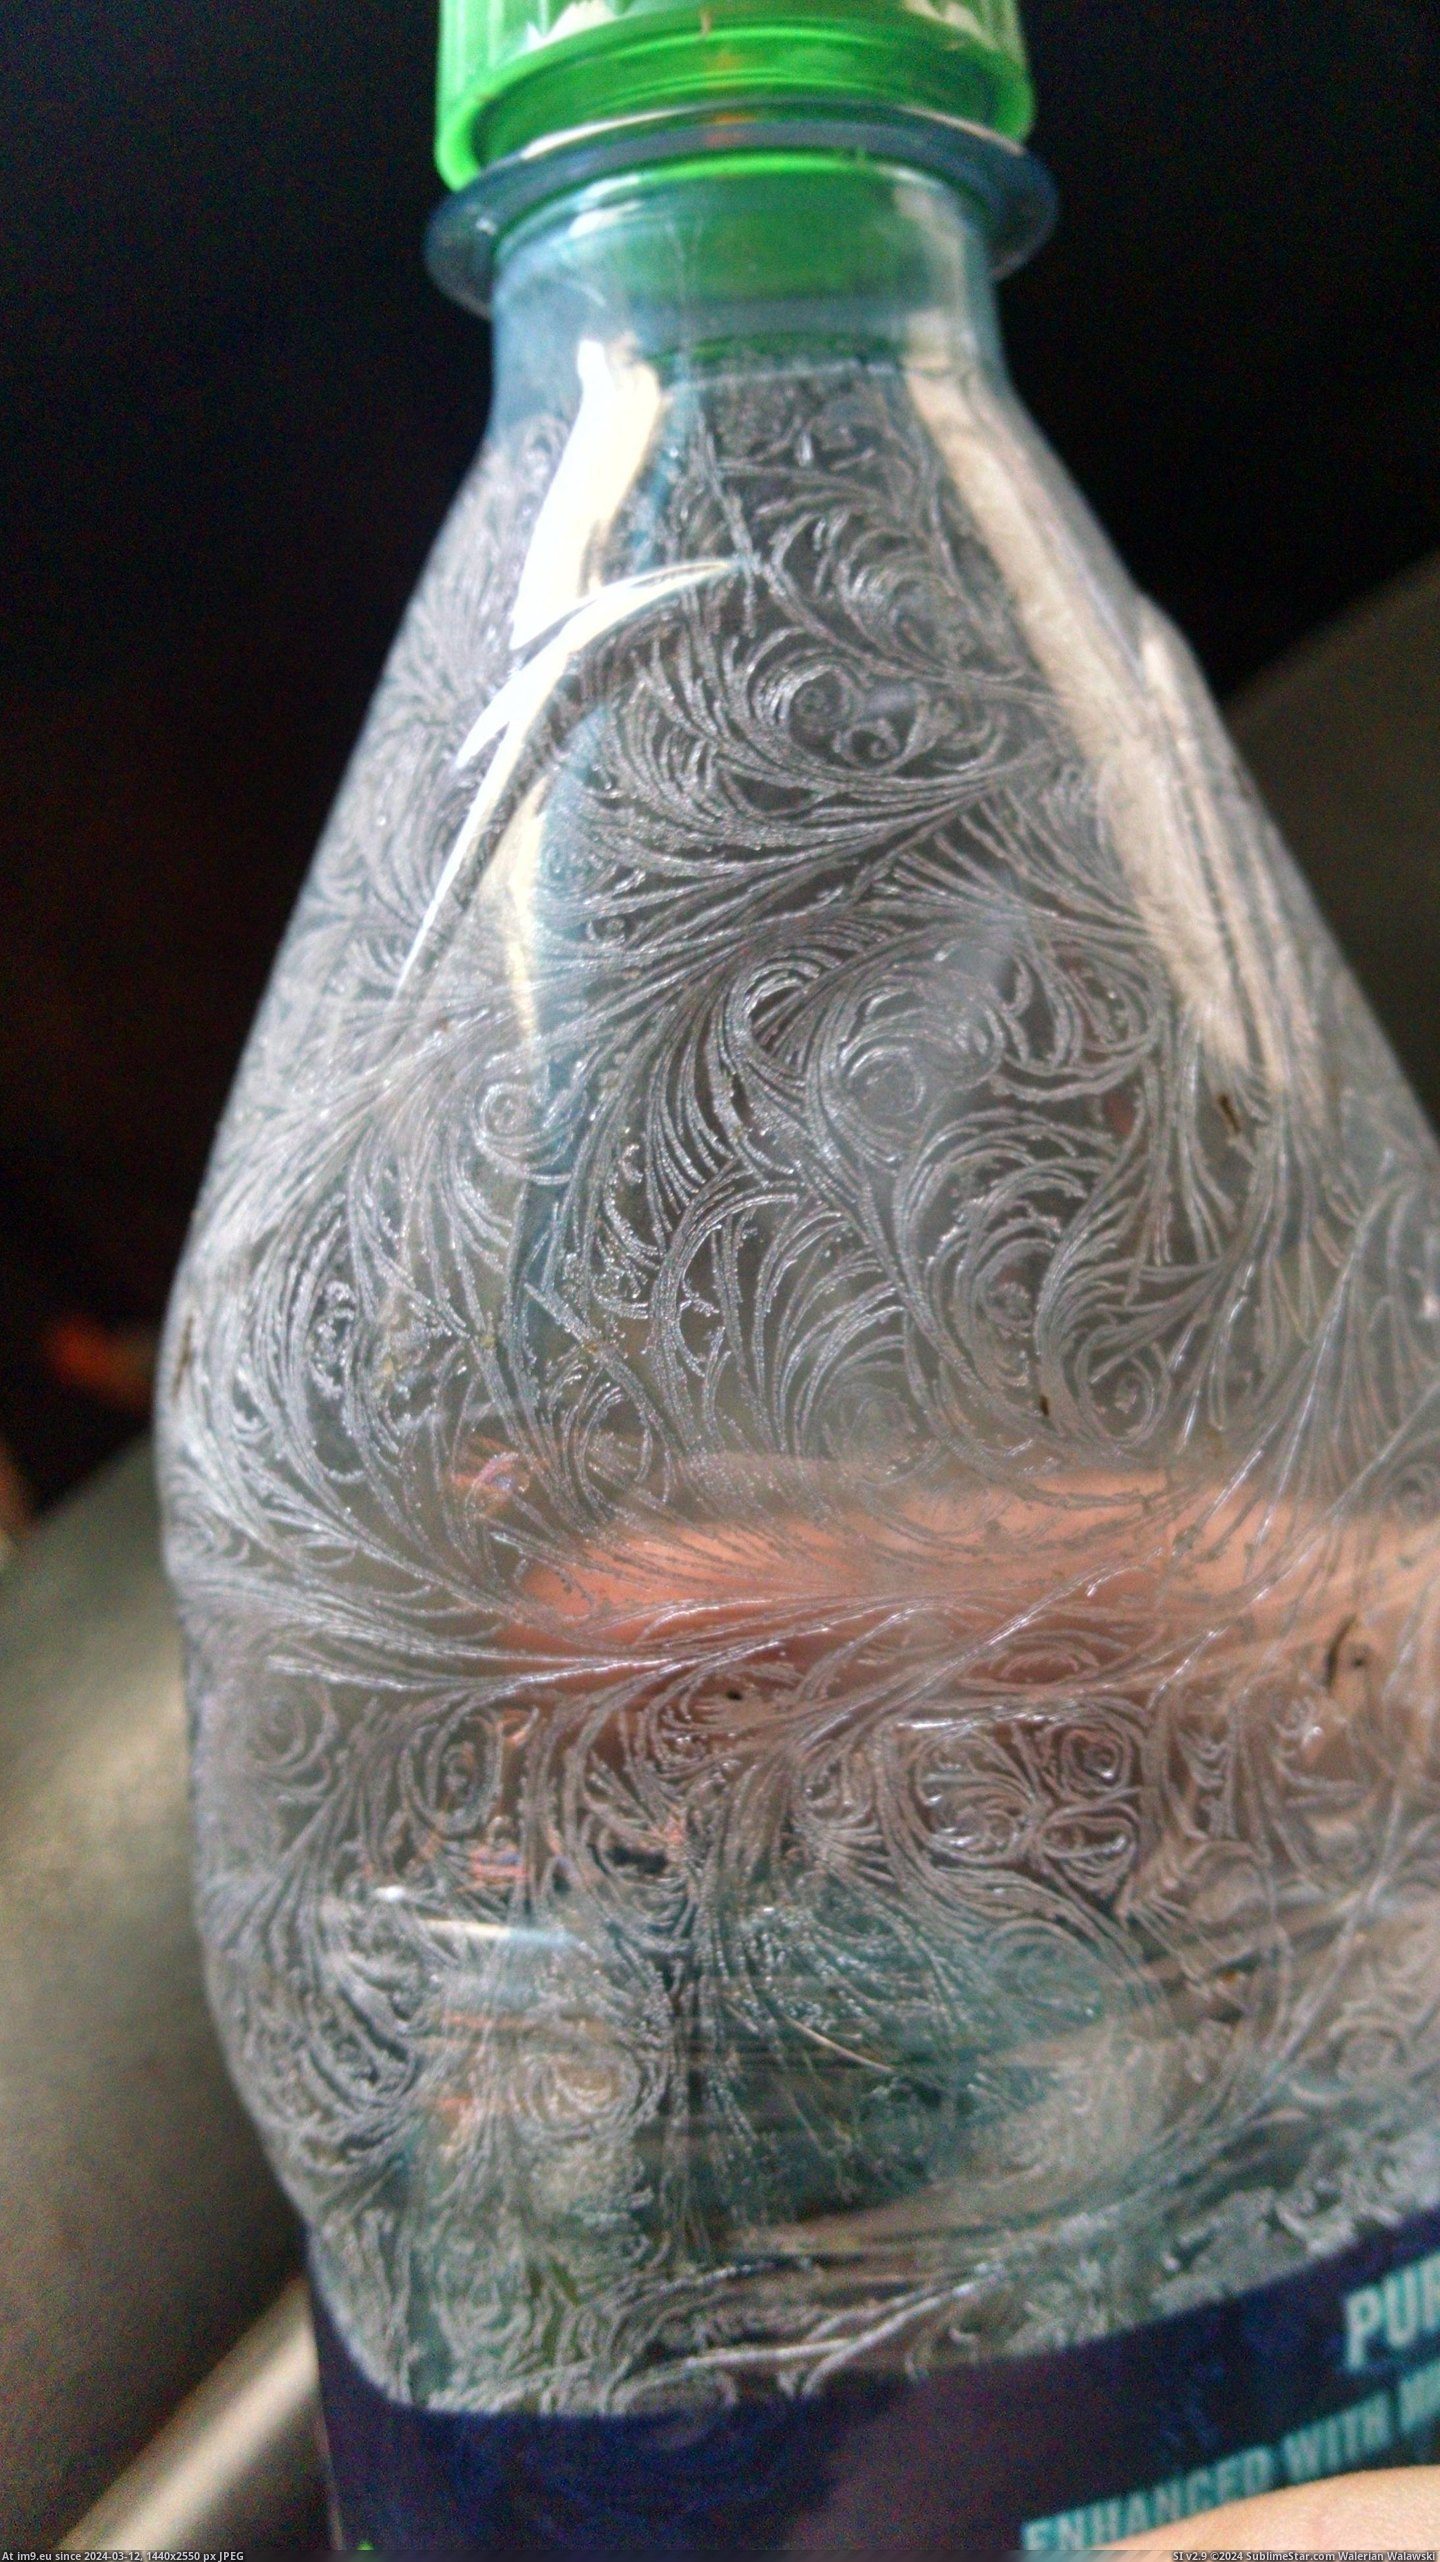 #Design #Night #Water #Bottle #Truck #Left #Ice #Natural [Pics] I left a water bottle in my truck over night this is the natural ice design on the inside Pic. (Изображение из альбом My r/PICS favs))